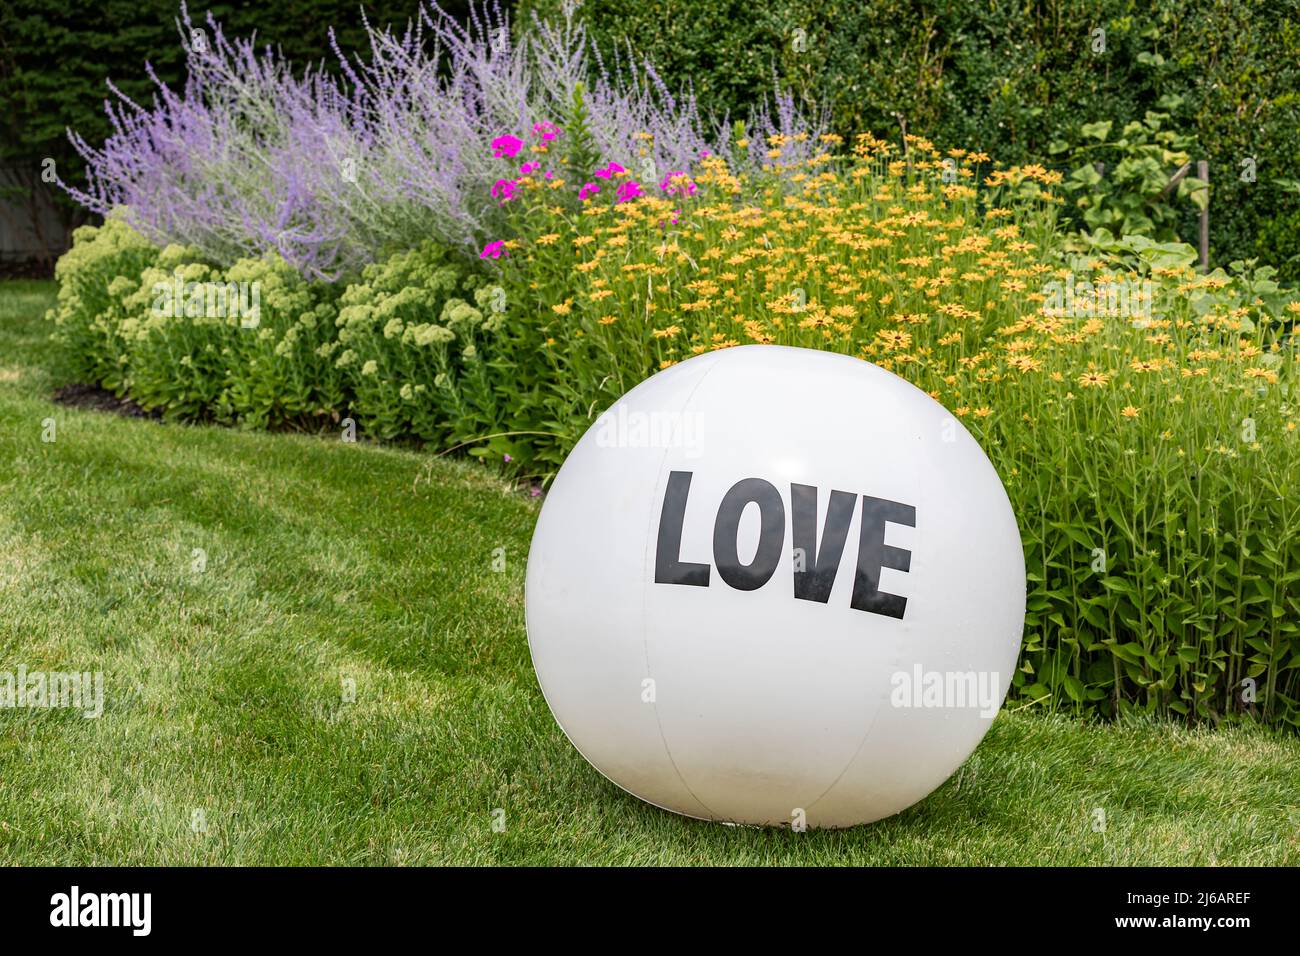 Large white inflatable ball with LOVE printed on it within a colorful background Stock Photo